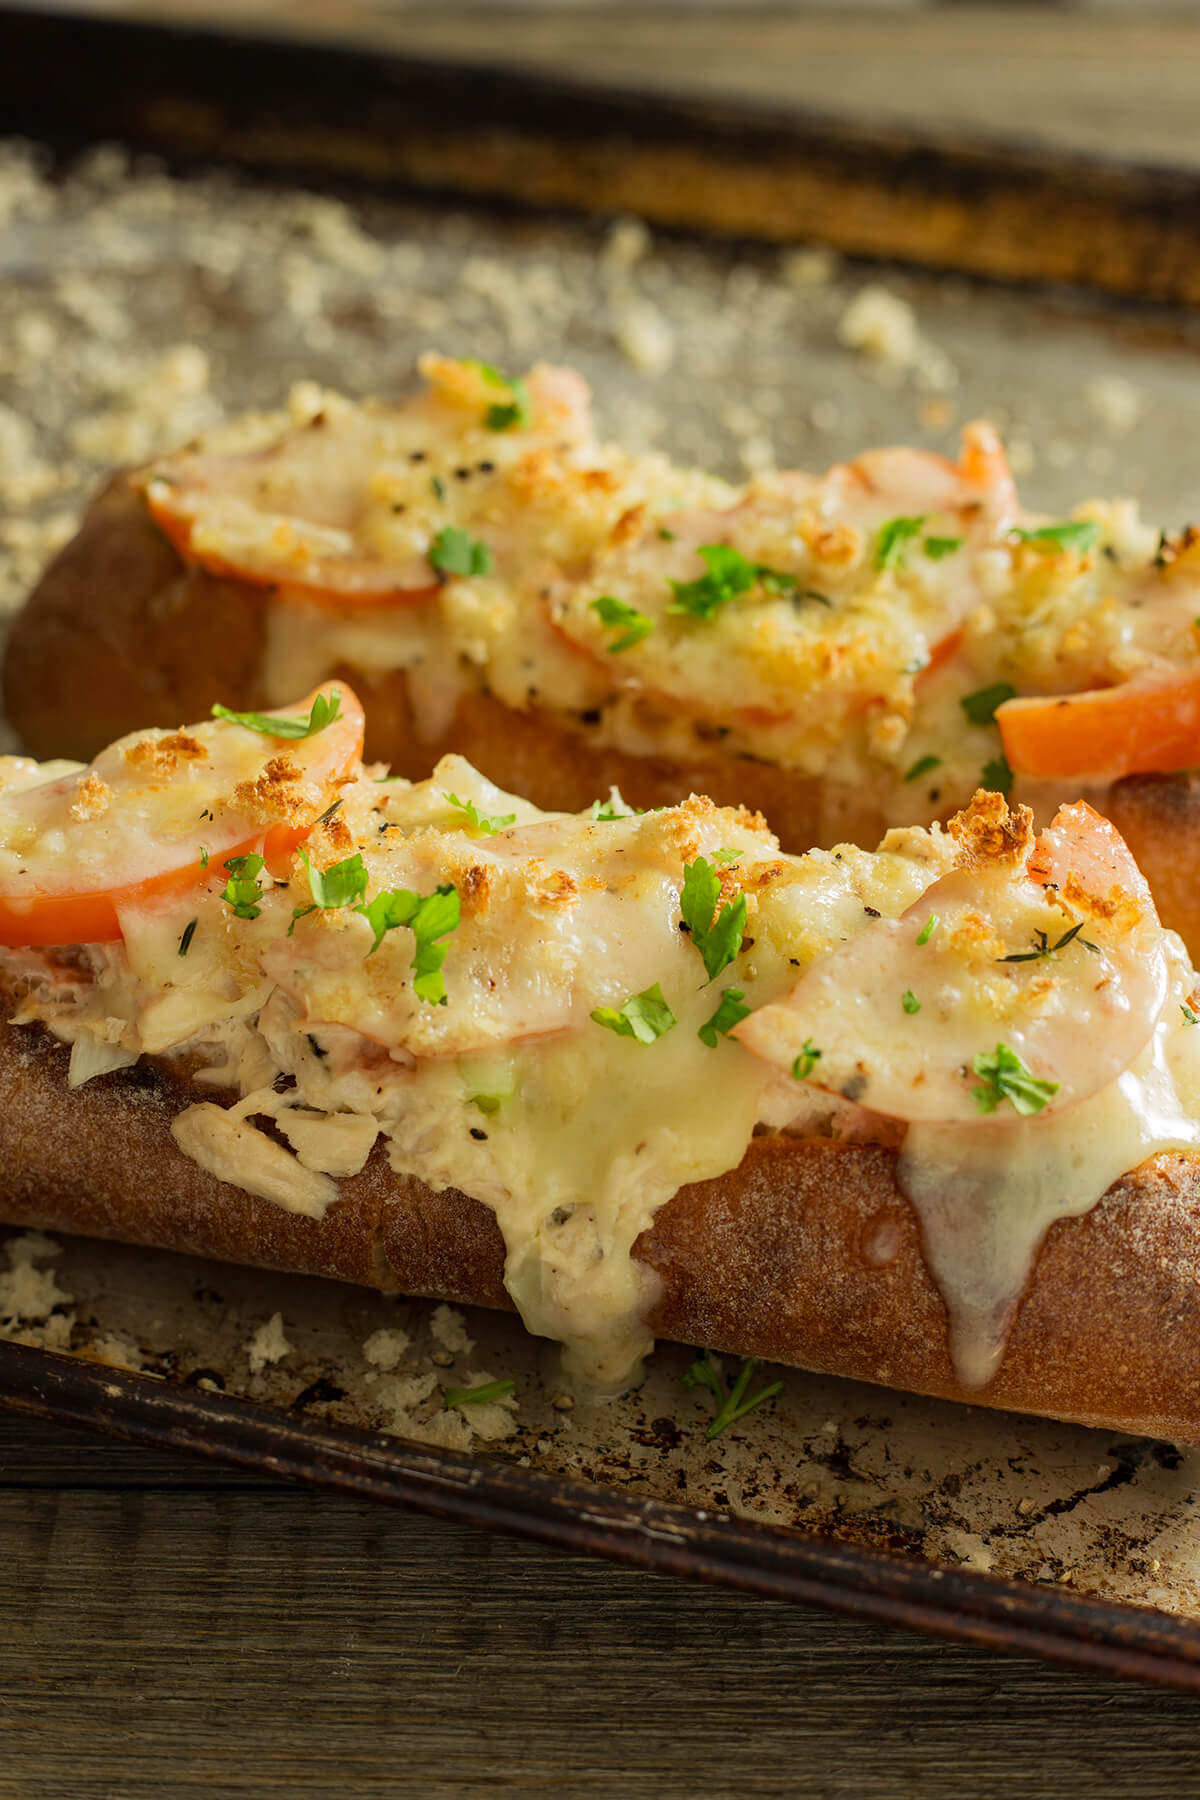 This cheesy Tuna Melt as a lunch or dinner entrée. This tuna melt is filled with creamy tuna salad topped with tomatoes and bubbling cheese that please a small or large crowd.